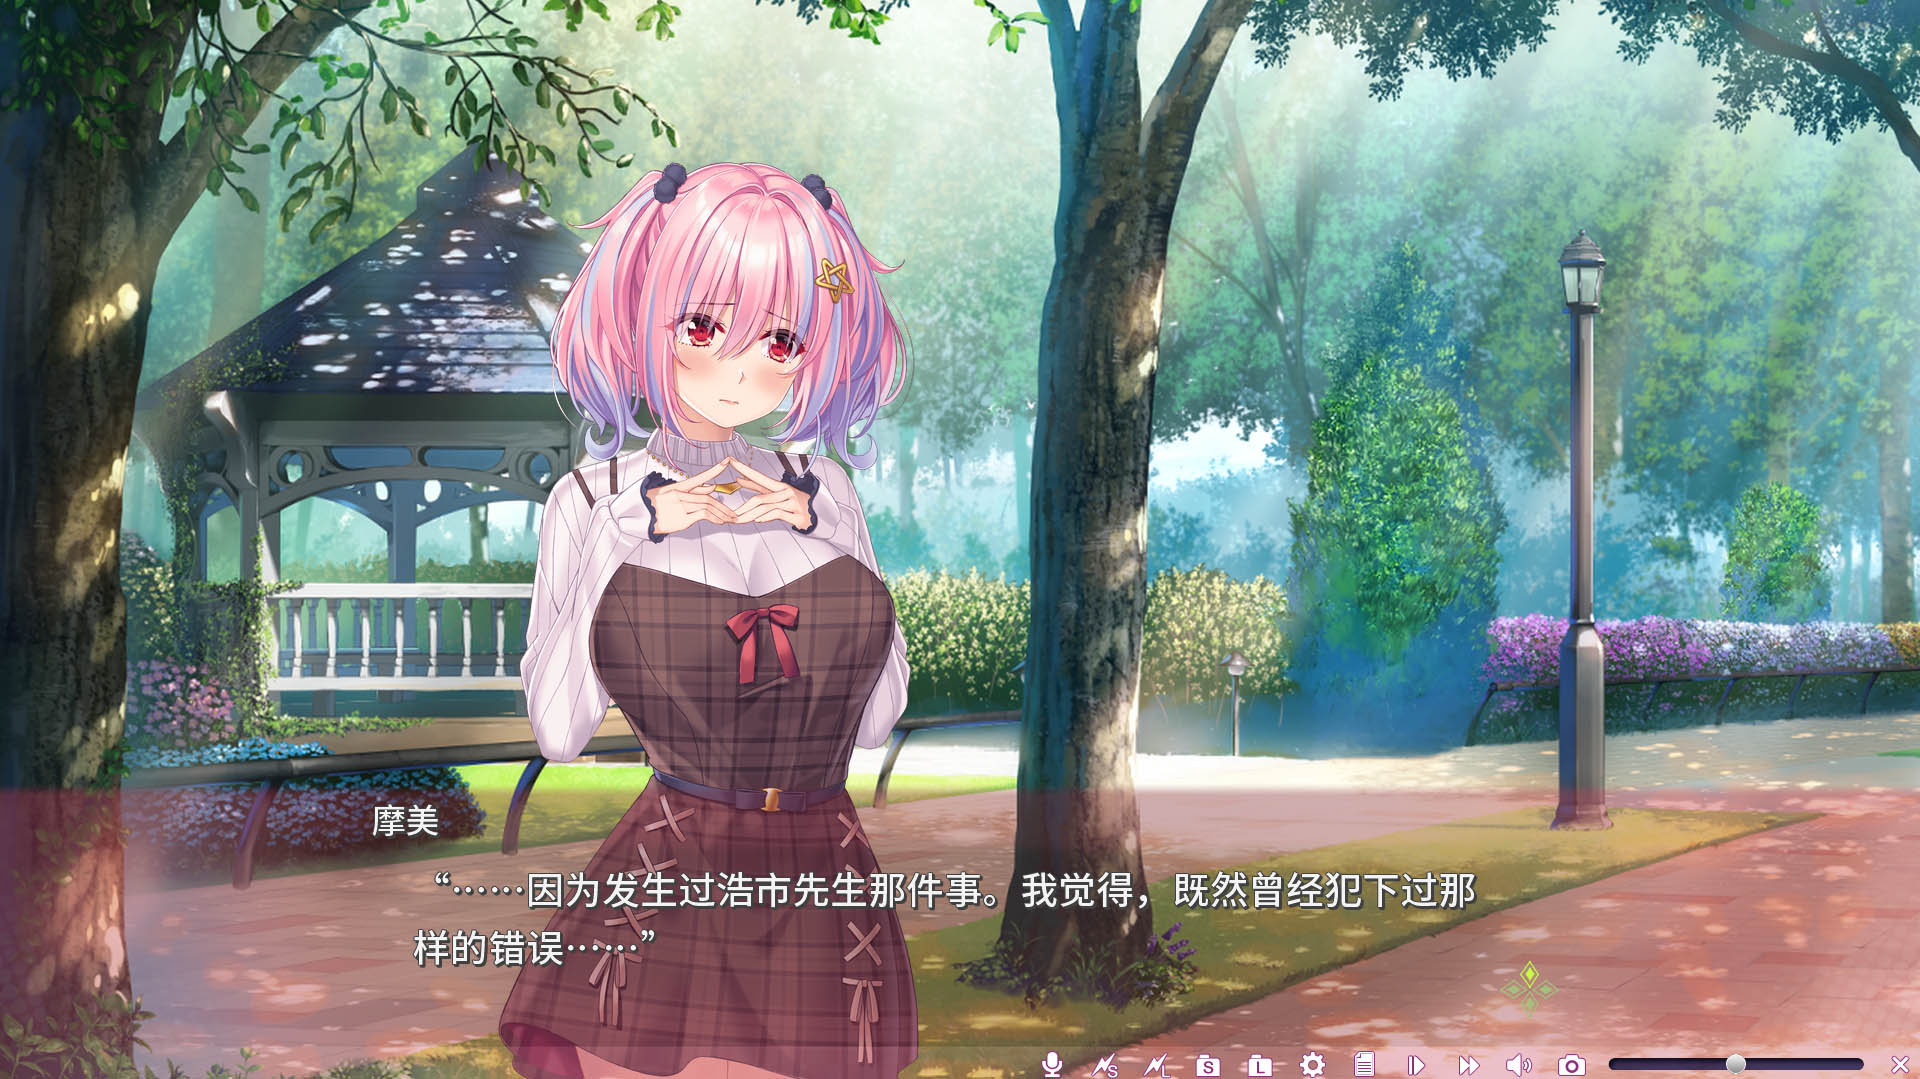 18+ DLC - Succubus Sessions: Mami Mamiya’s Sweet Slice of Hell (Simplified Chinese) Patch for Steam - Visual Novel - 1